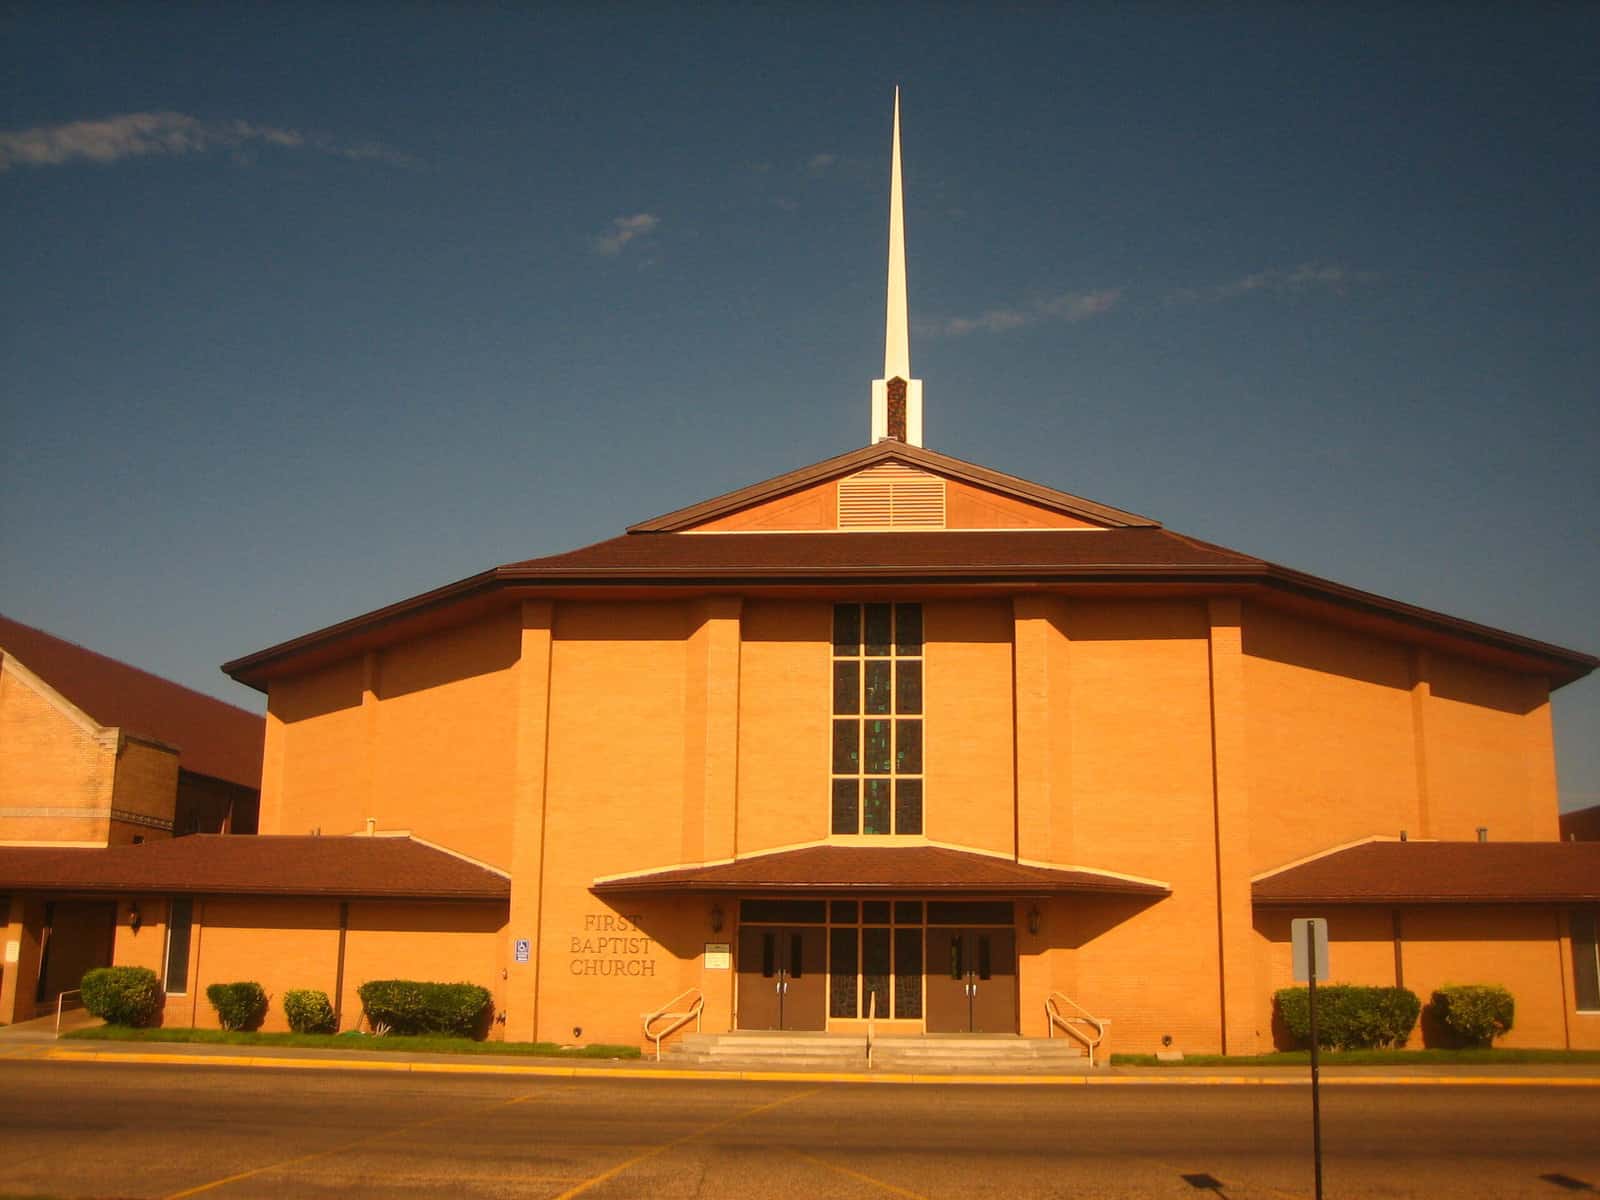 First Baptist Church in Dumas Texas is shown from the front.